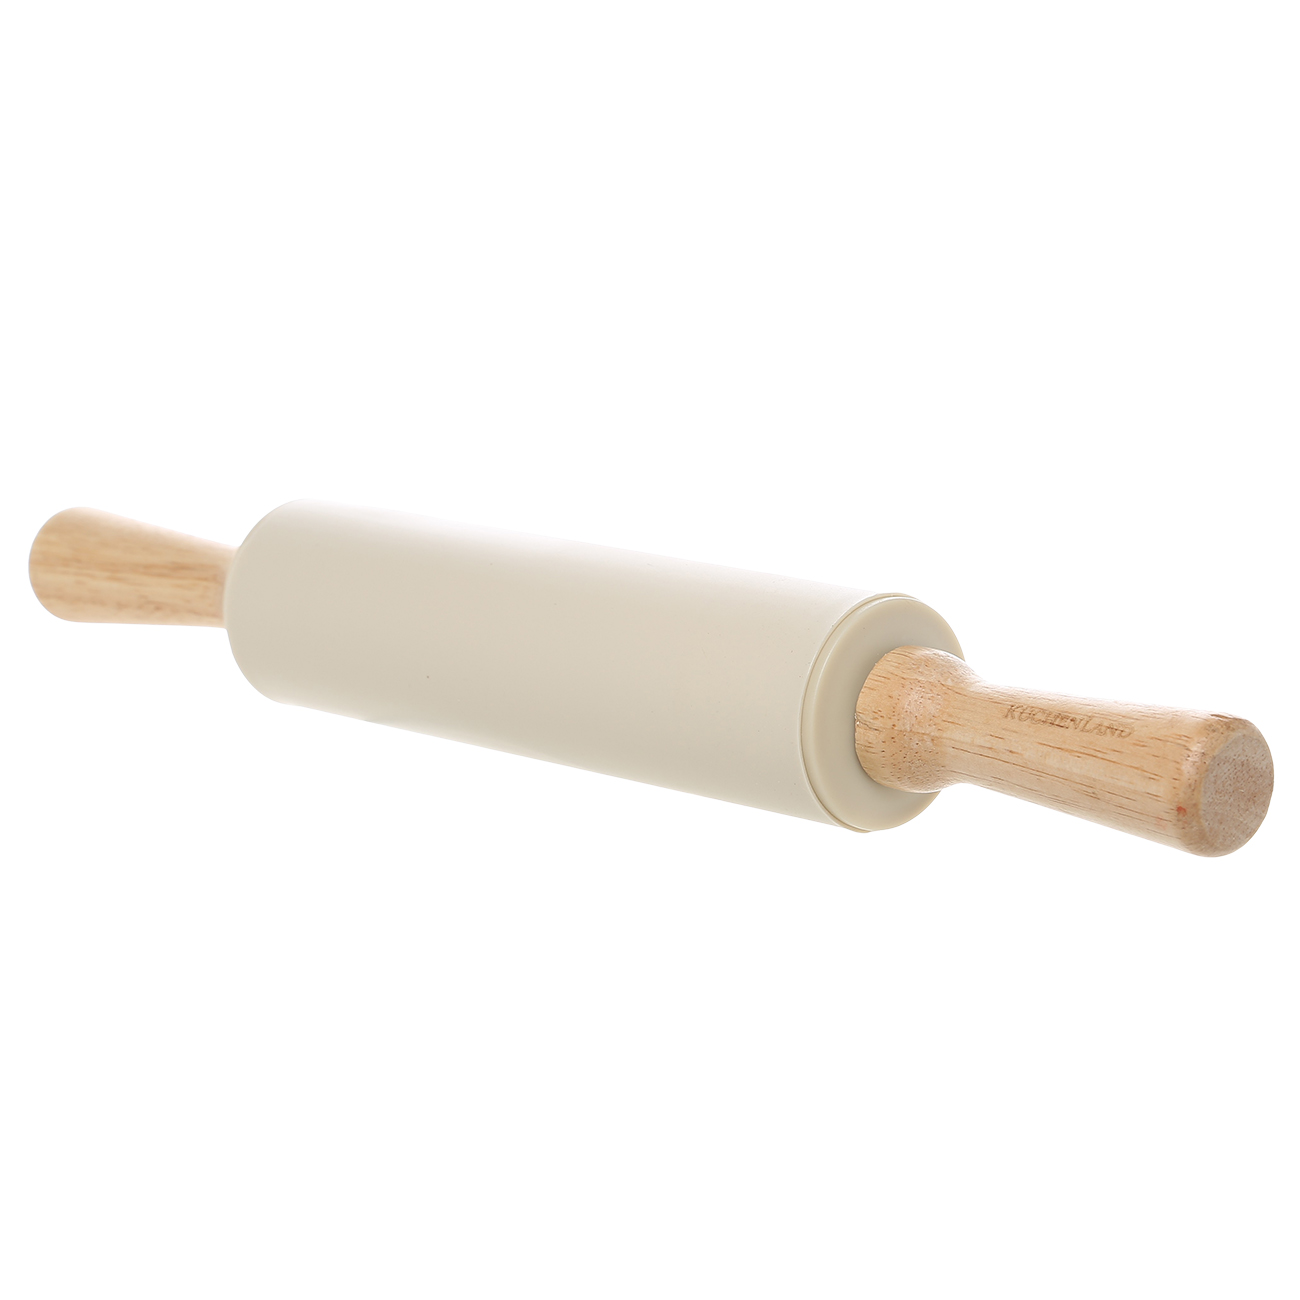 Rolling pin, 38 cm, silicone / wood, beige, Bakery изображение № 2